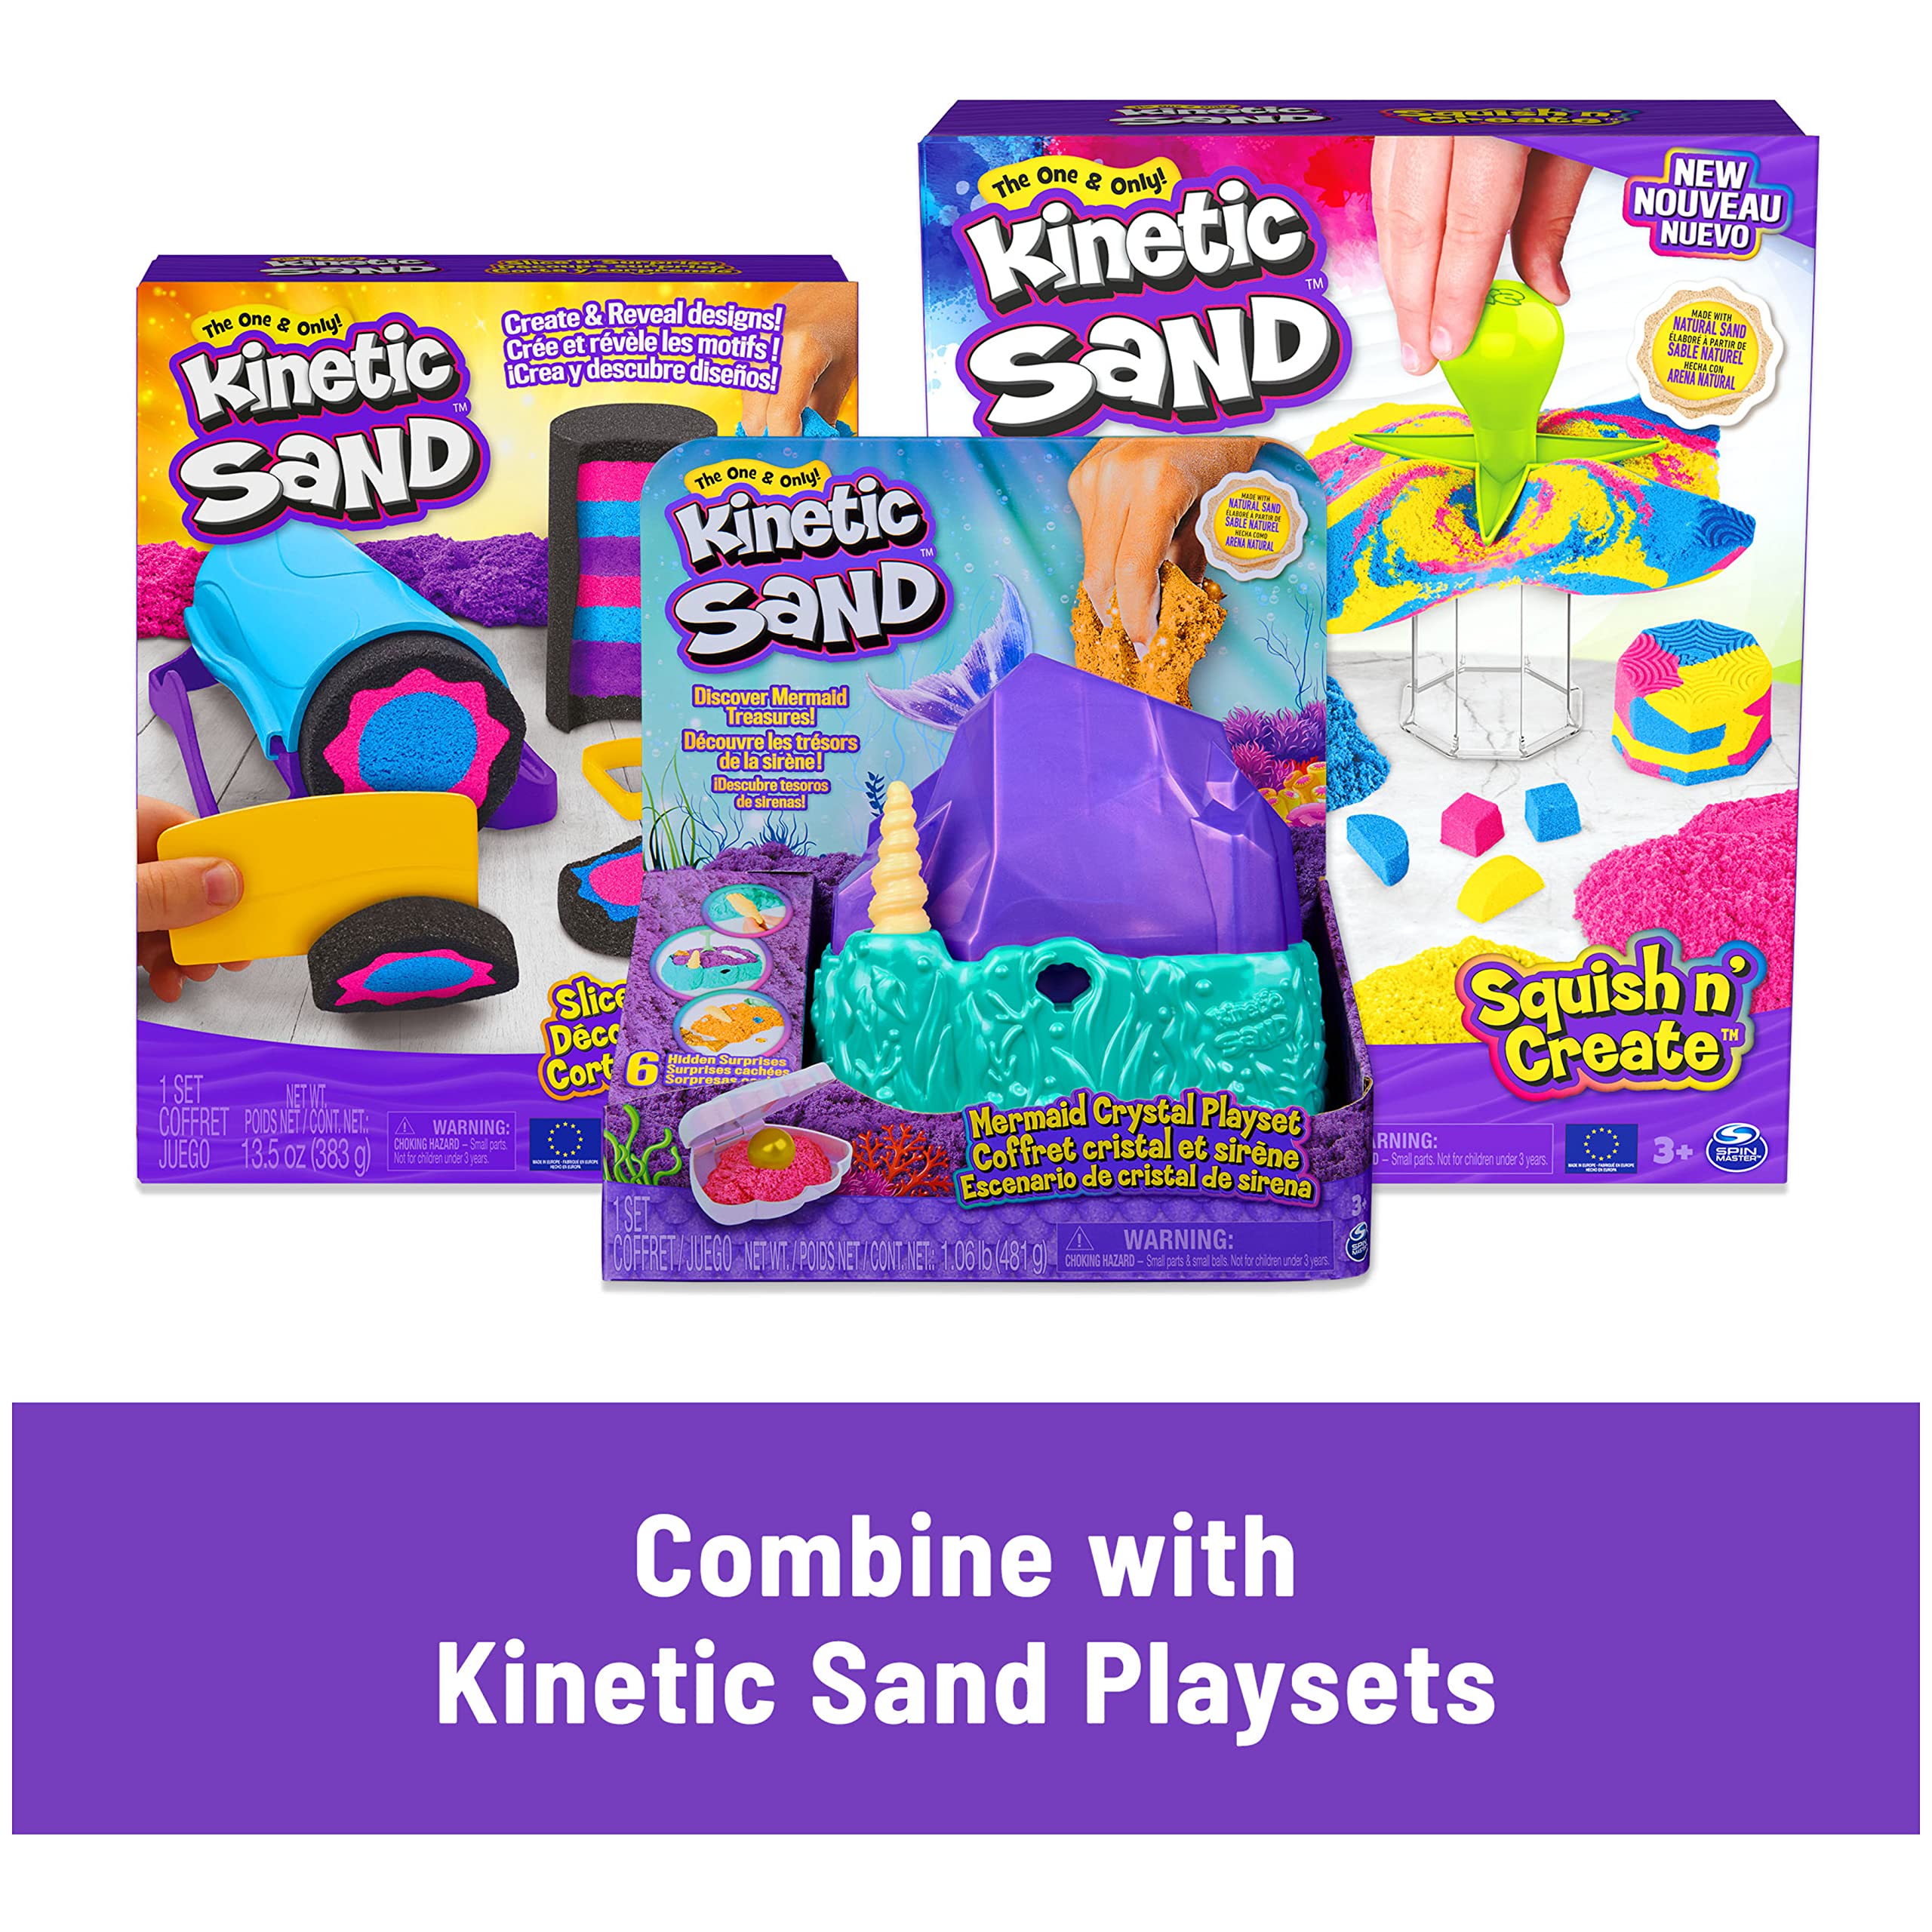 Kinetic Sand, 3lbs Beach Sand for Ages 3 and Up (Packaging My Vary)